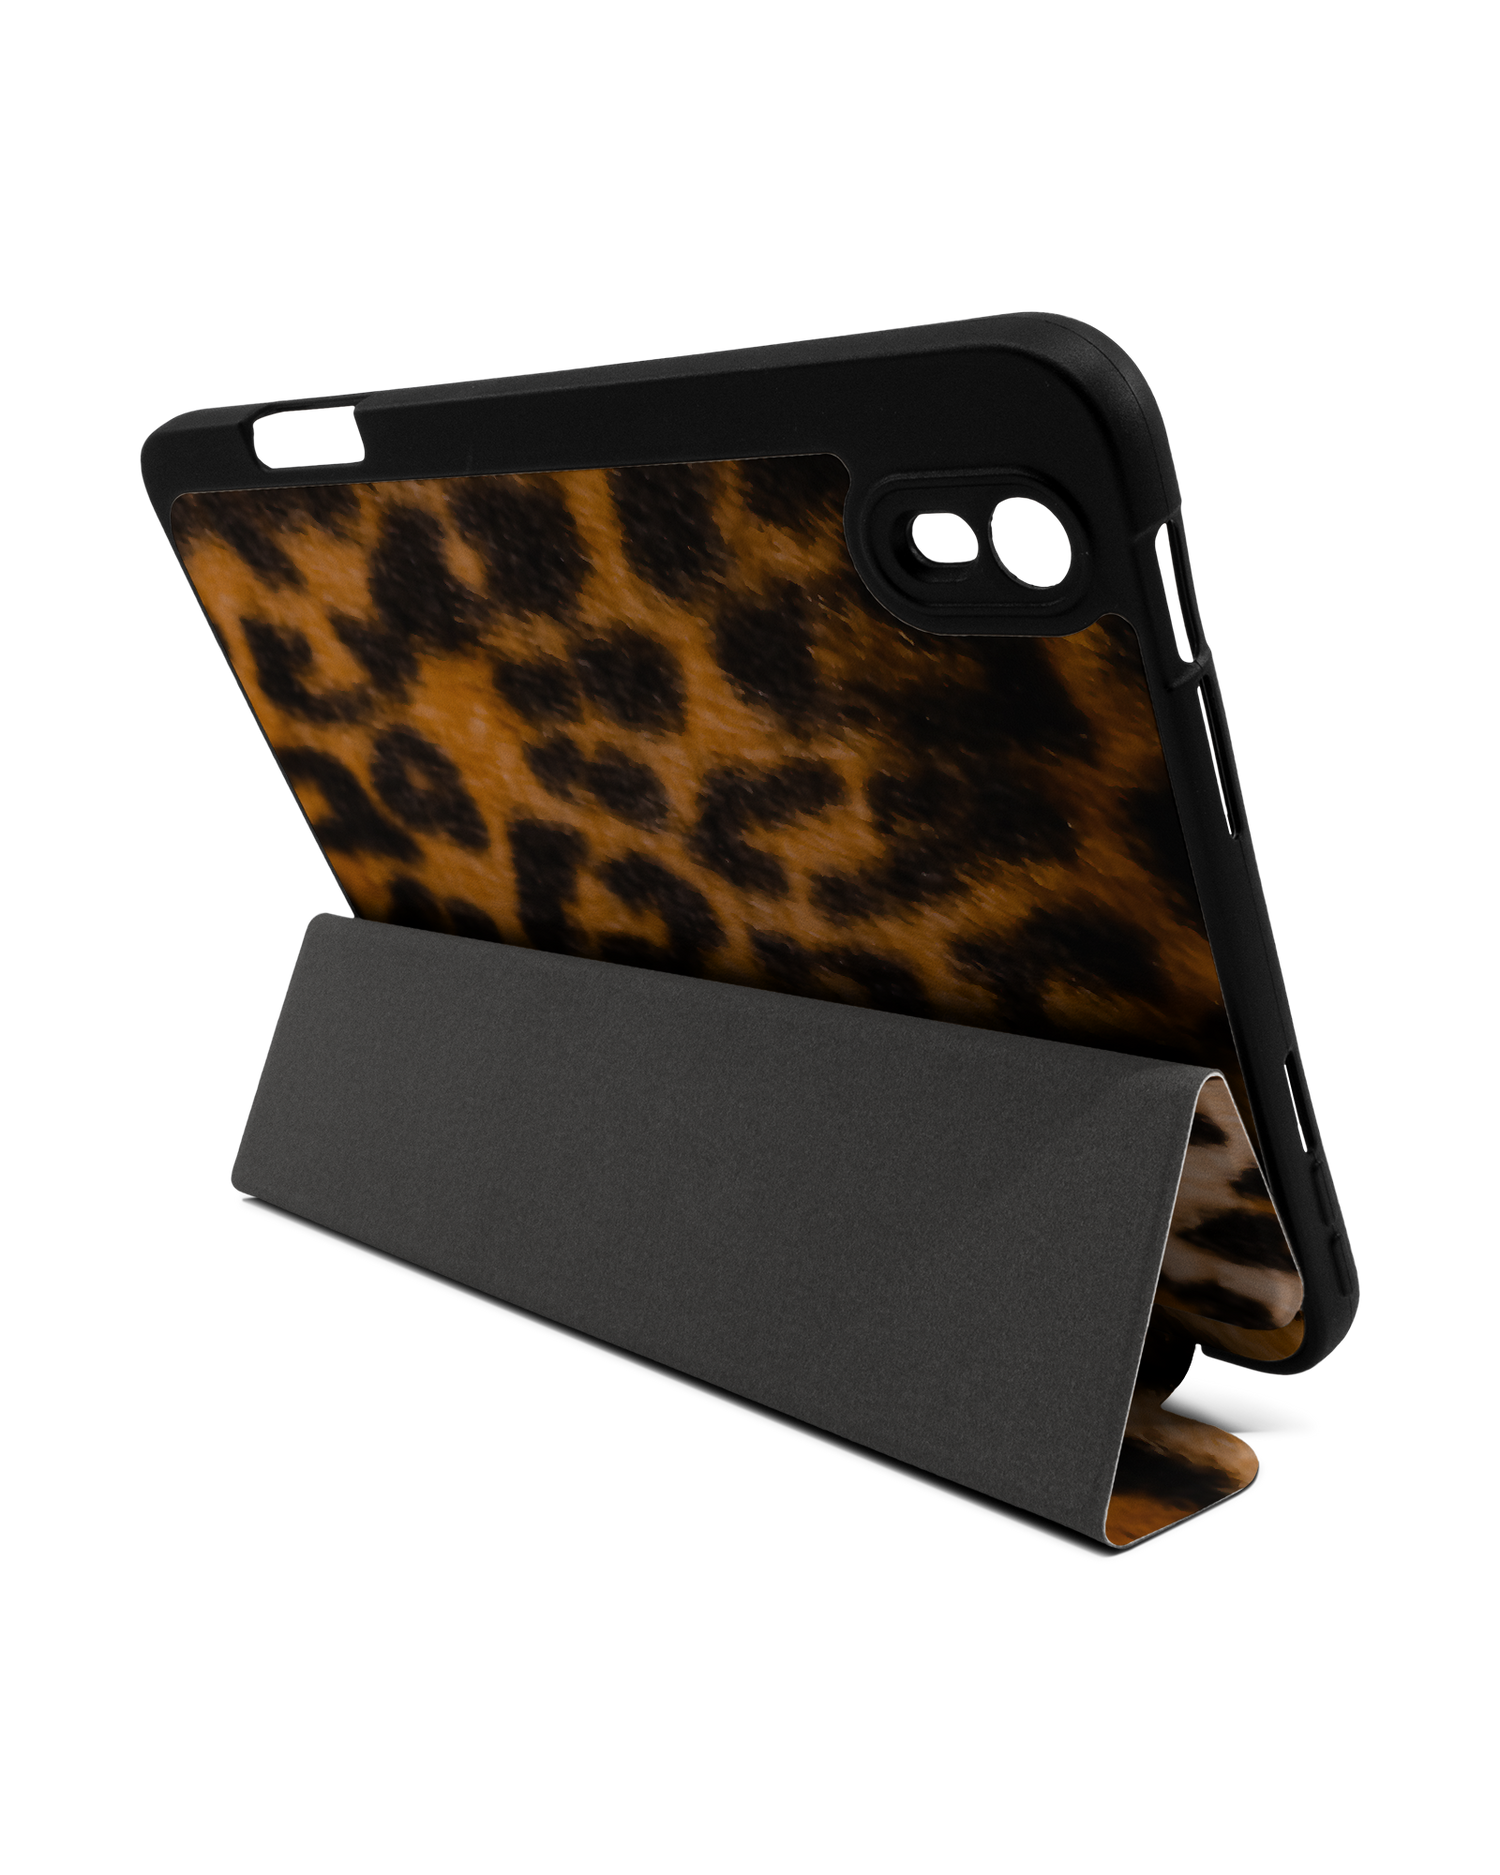 Leopard Pattern iPad Case with Pencil Holder Apple iPad mini 6 (2021): Set up in landscape format (back view)